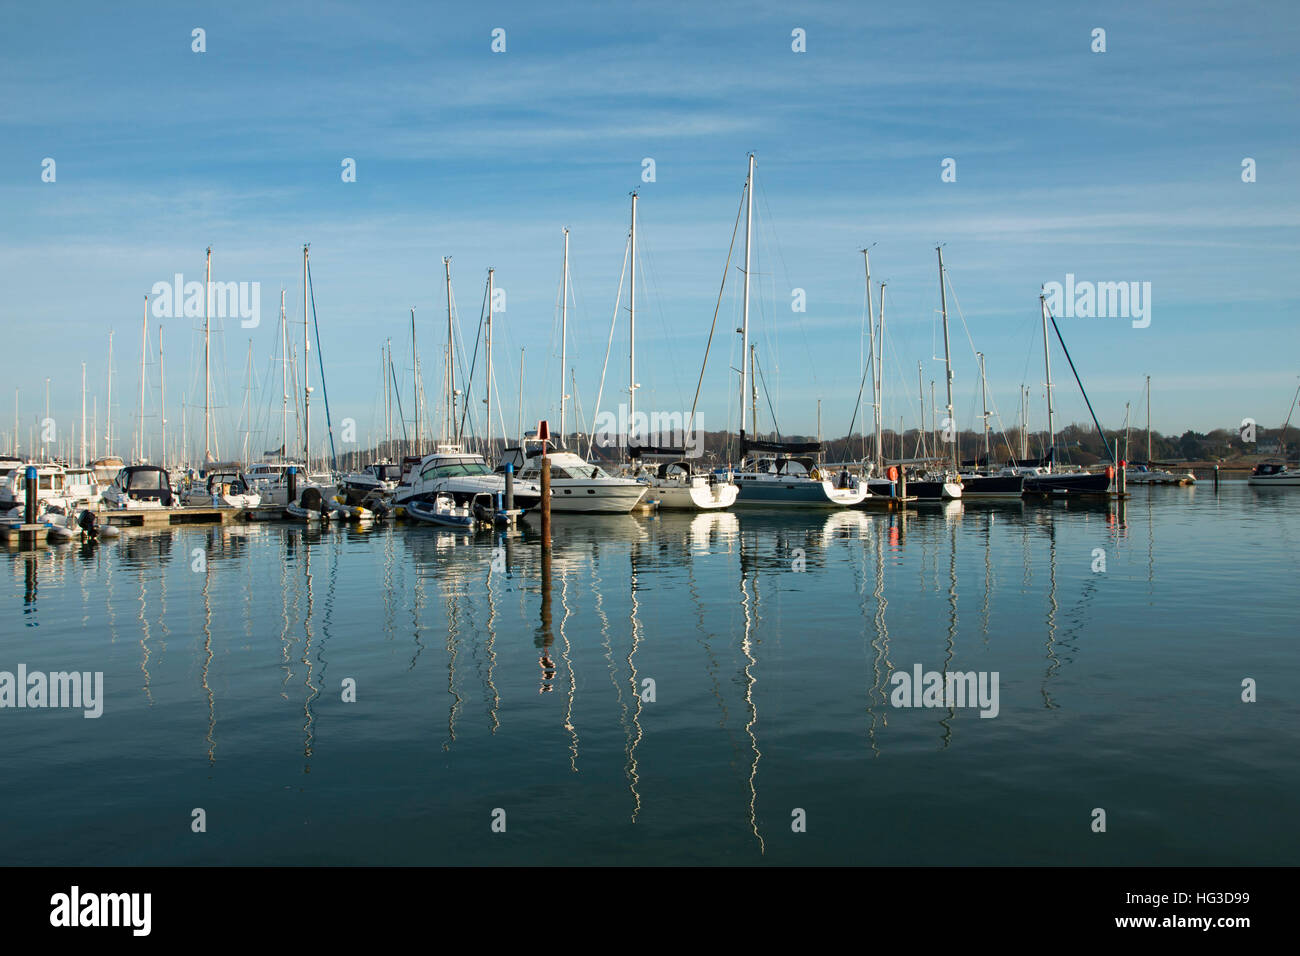 Yachts and boats mored at the marina at Hamble which is a picturesque village on the south coast of England Stock Photo